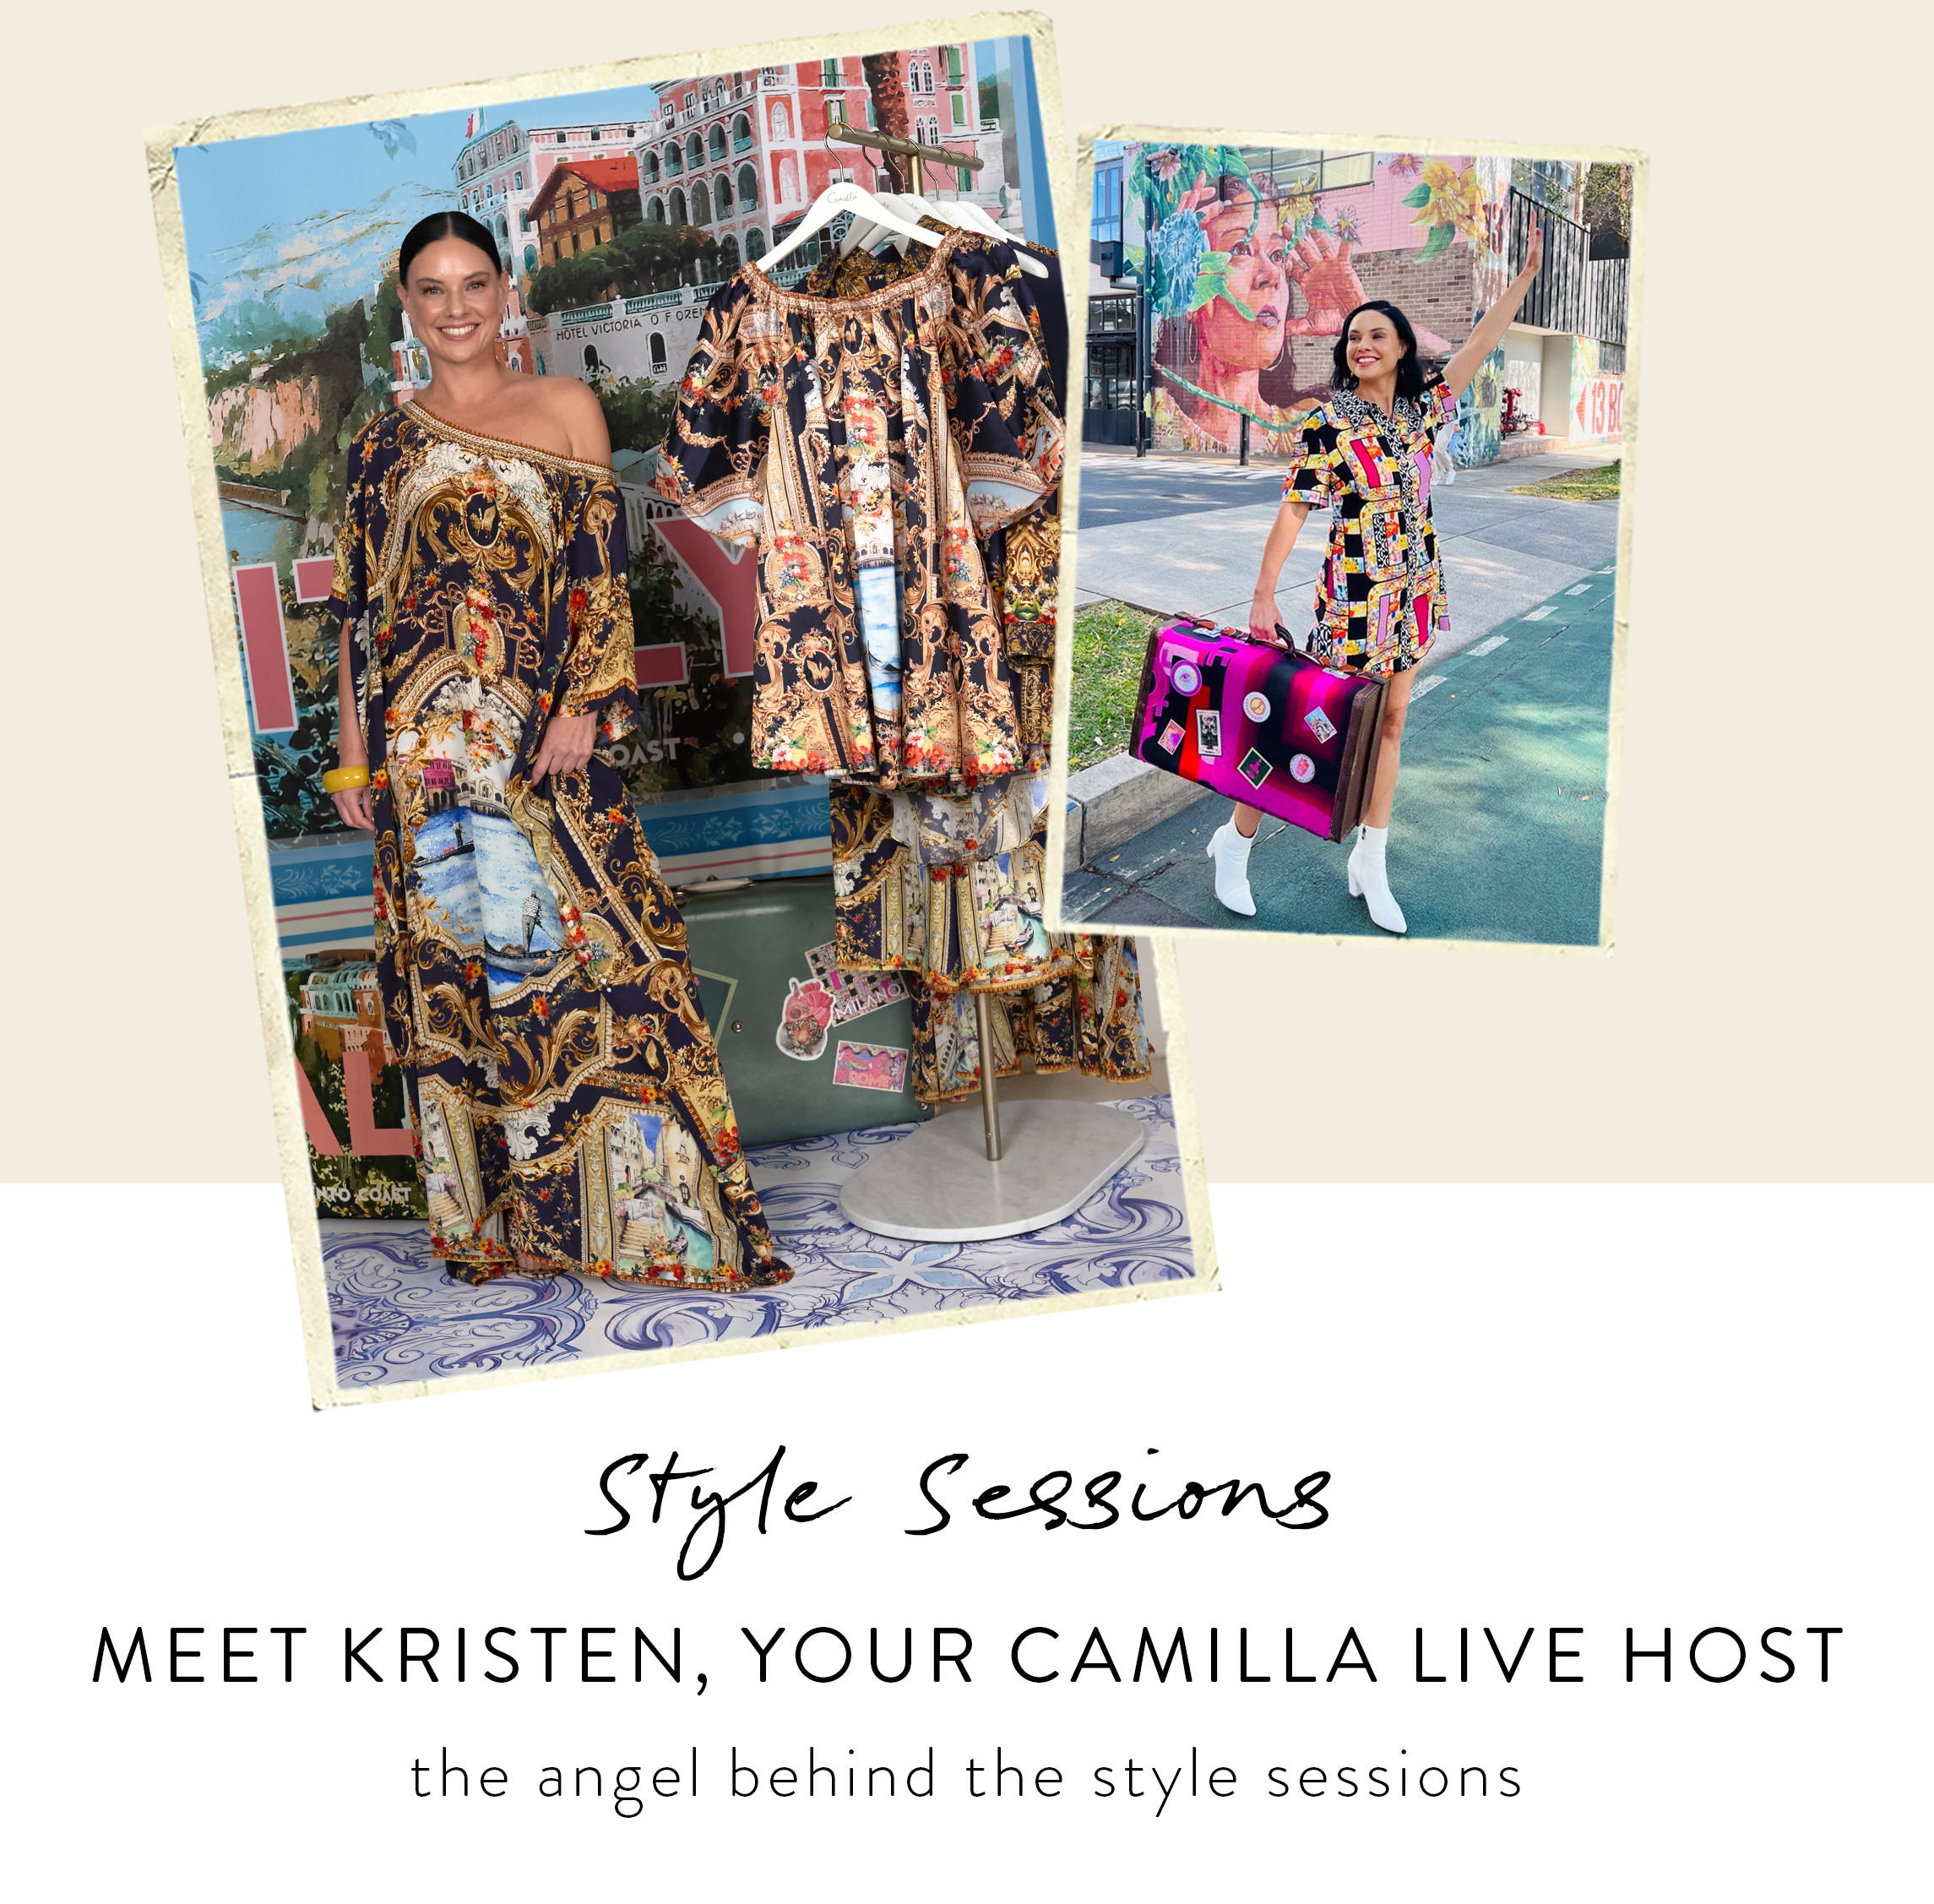 STYLE SESSIONS MEET KRISTEN, YOUR CAMILLA LIVE HOST, THE ANGEL BEHIND THE STYLE SESSIONS